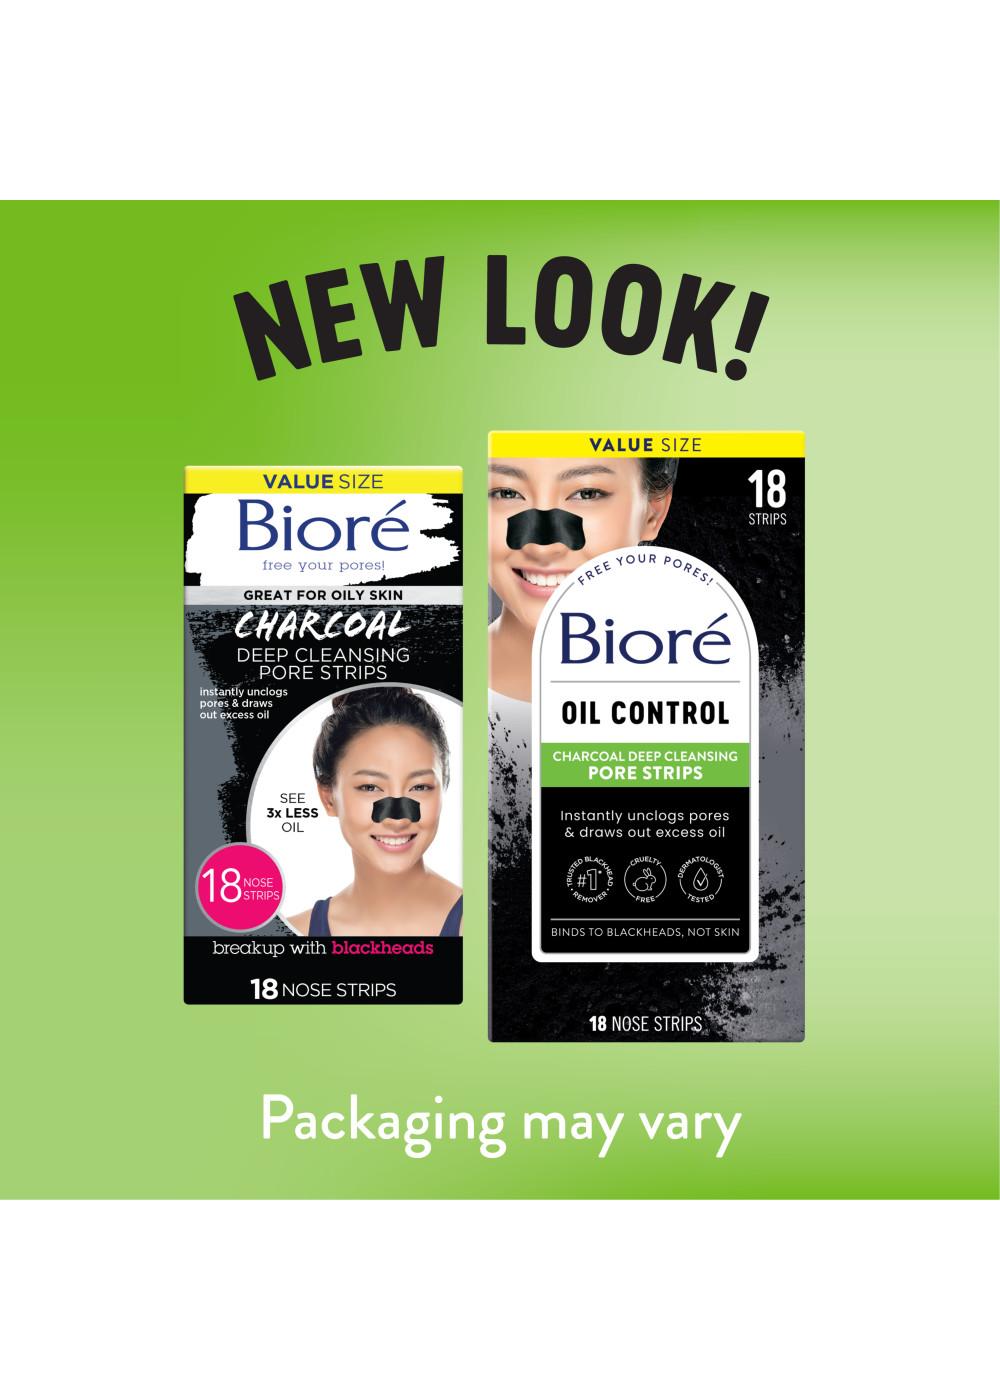 Bioré Oil Control Charcoal Deep Cleansing Pore Strips; image 6 of 10